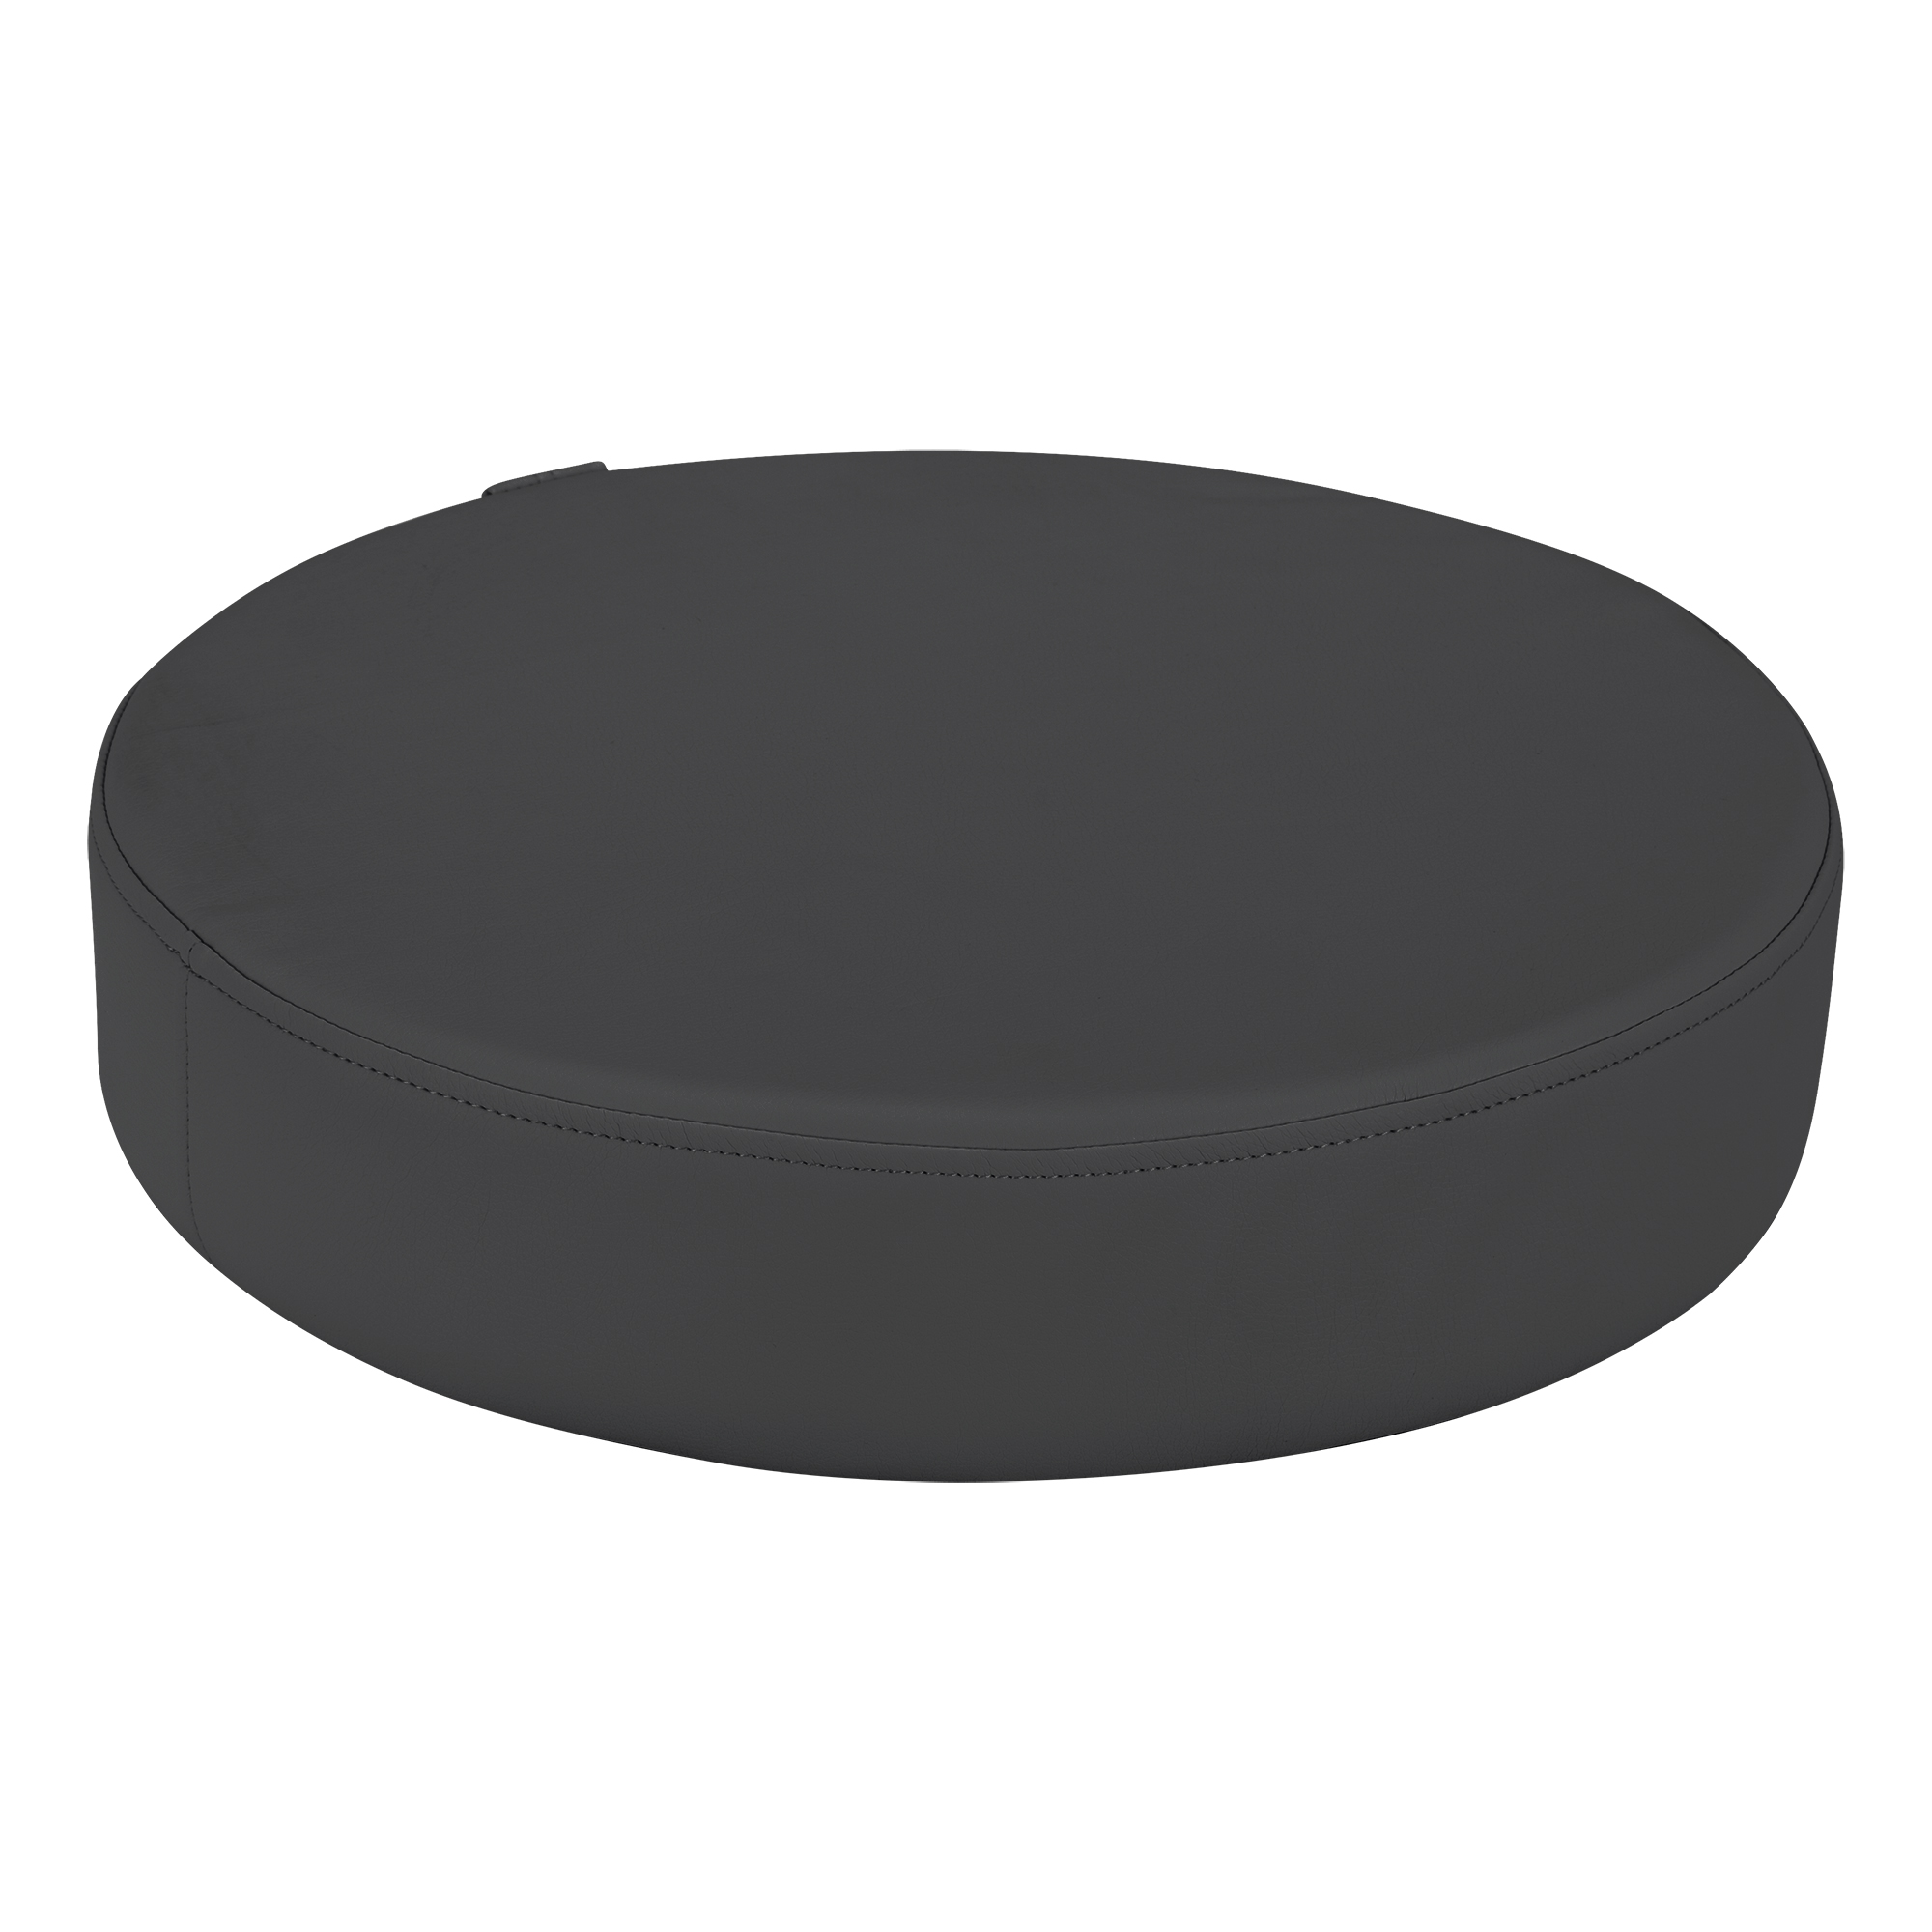 Atom Soft Seating Floor Stool - Vinyl at School Outfitters